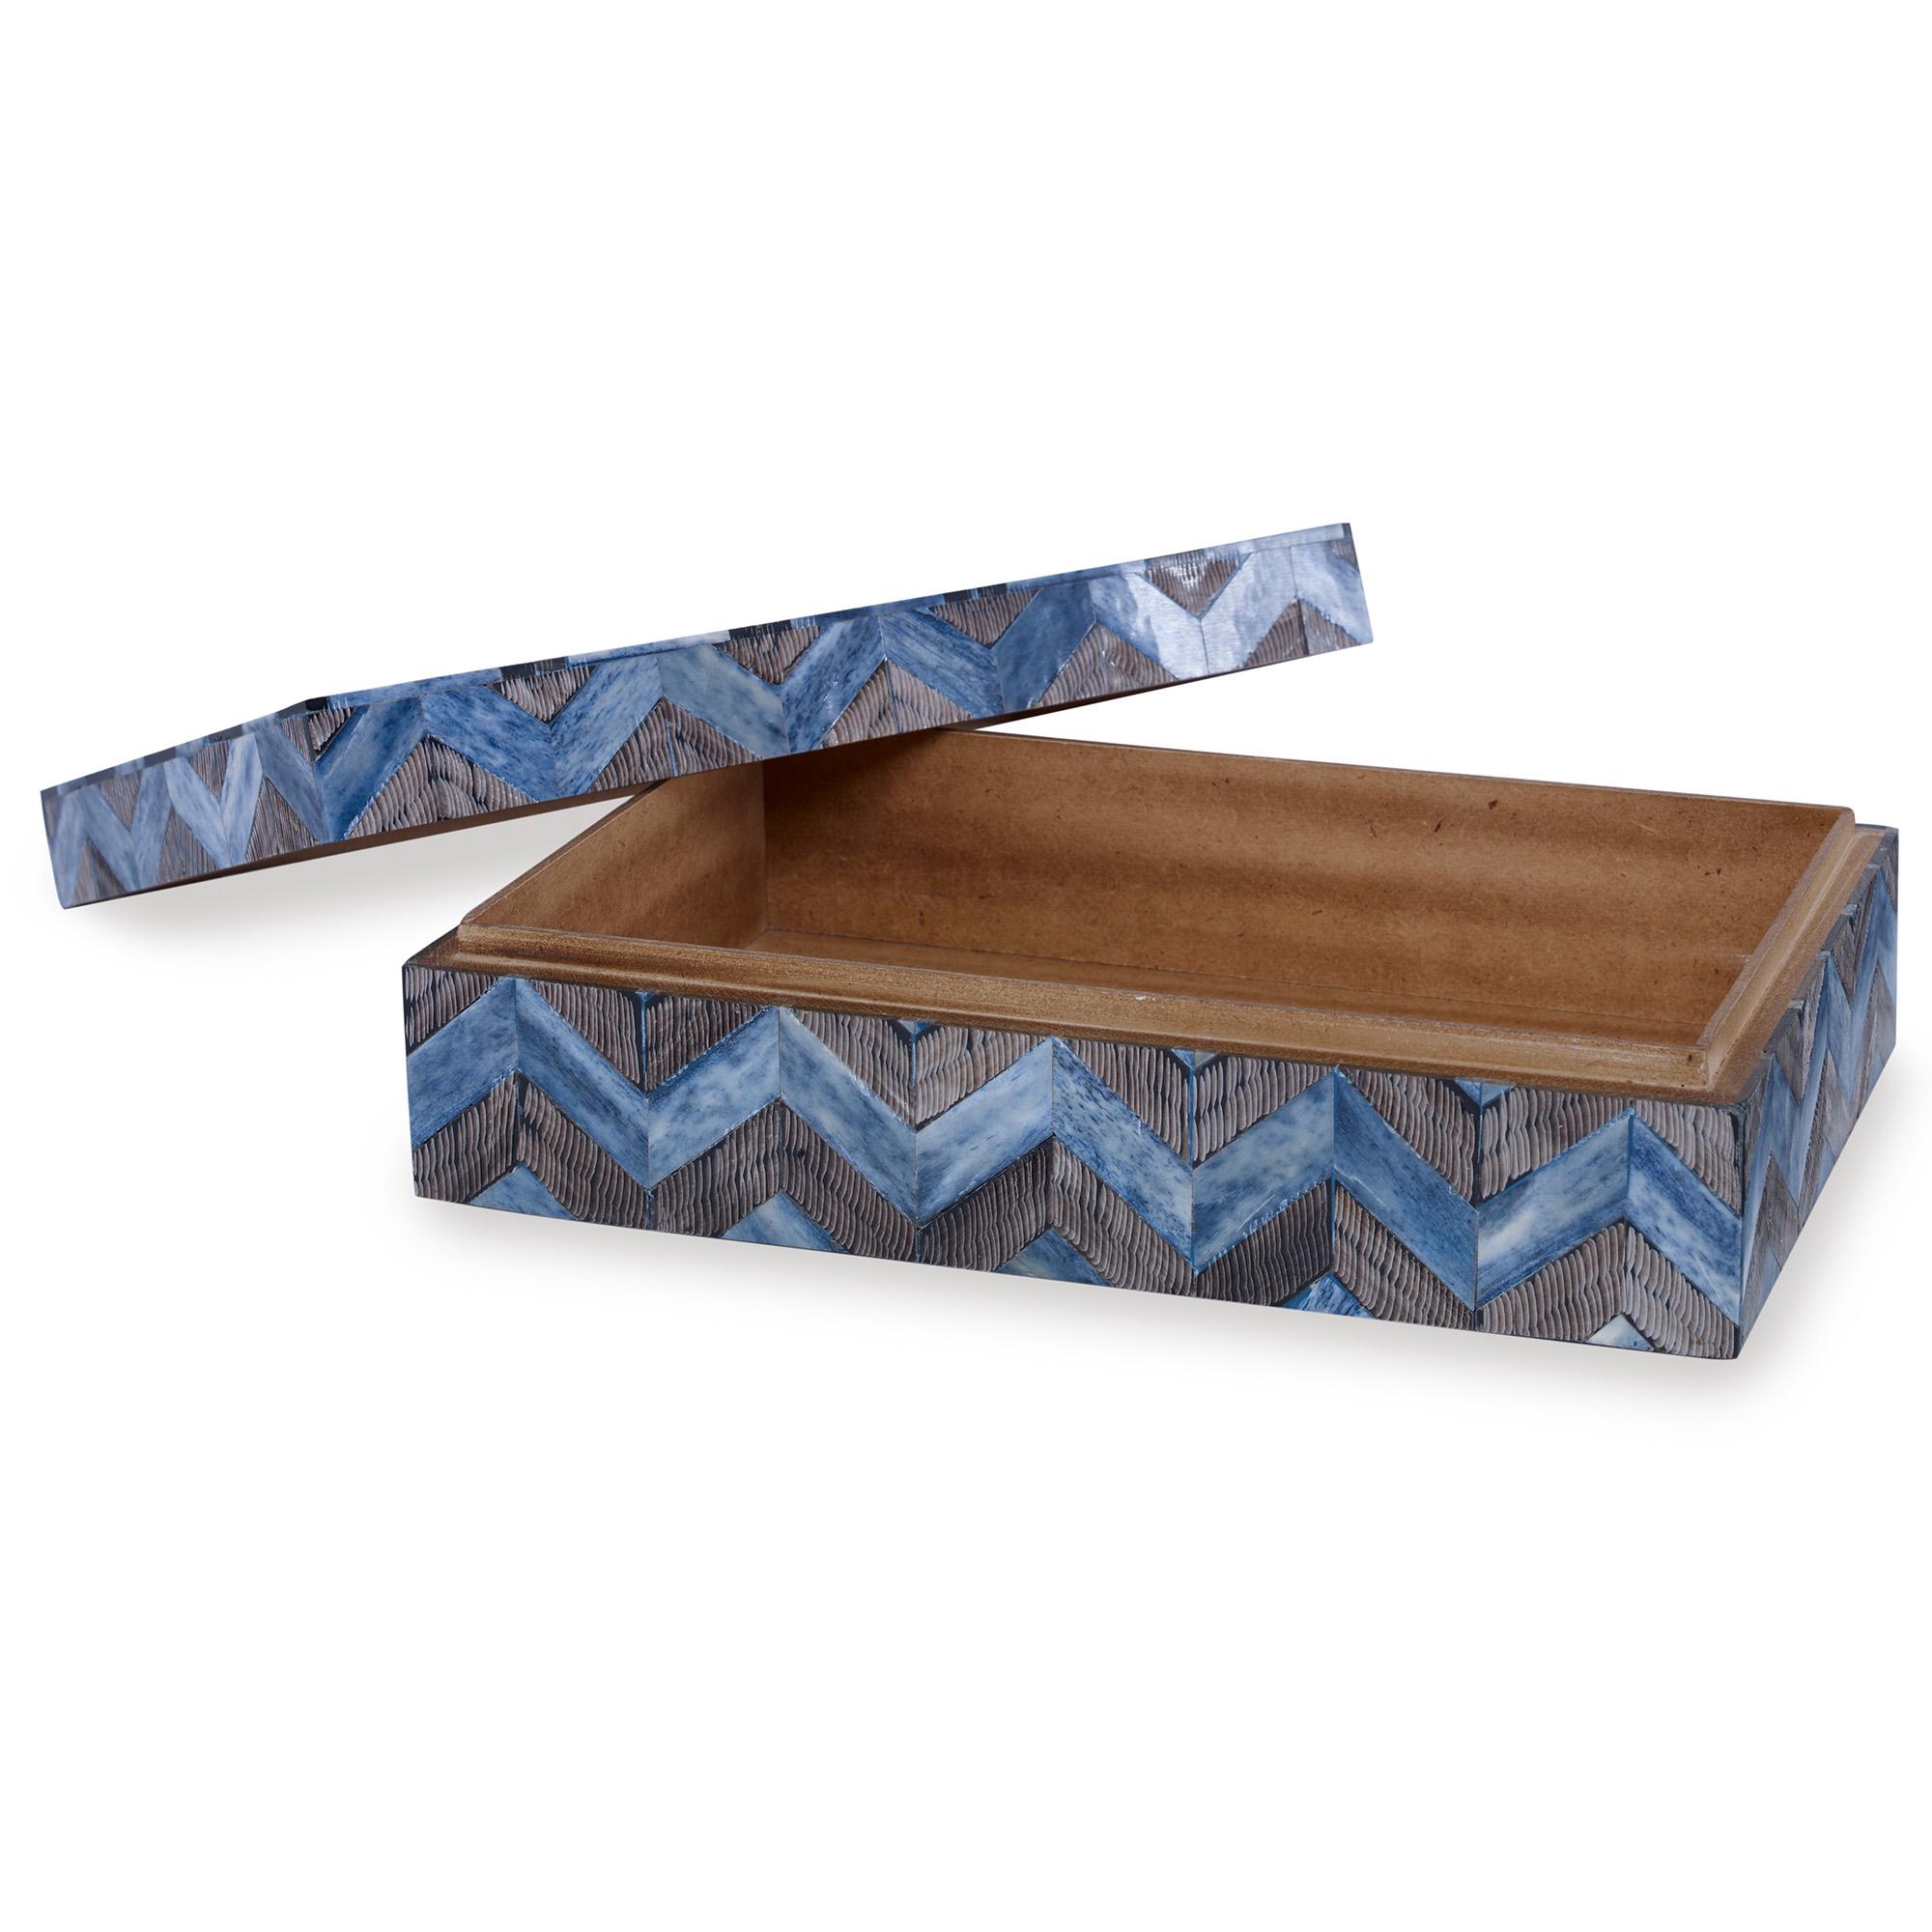 A decorative box featuring a zigzag pattern made of bone and Horn. The aesthetic is inspired by Portuguese azulejos, painted ceramic tiles.
  